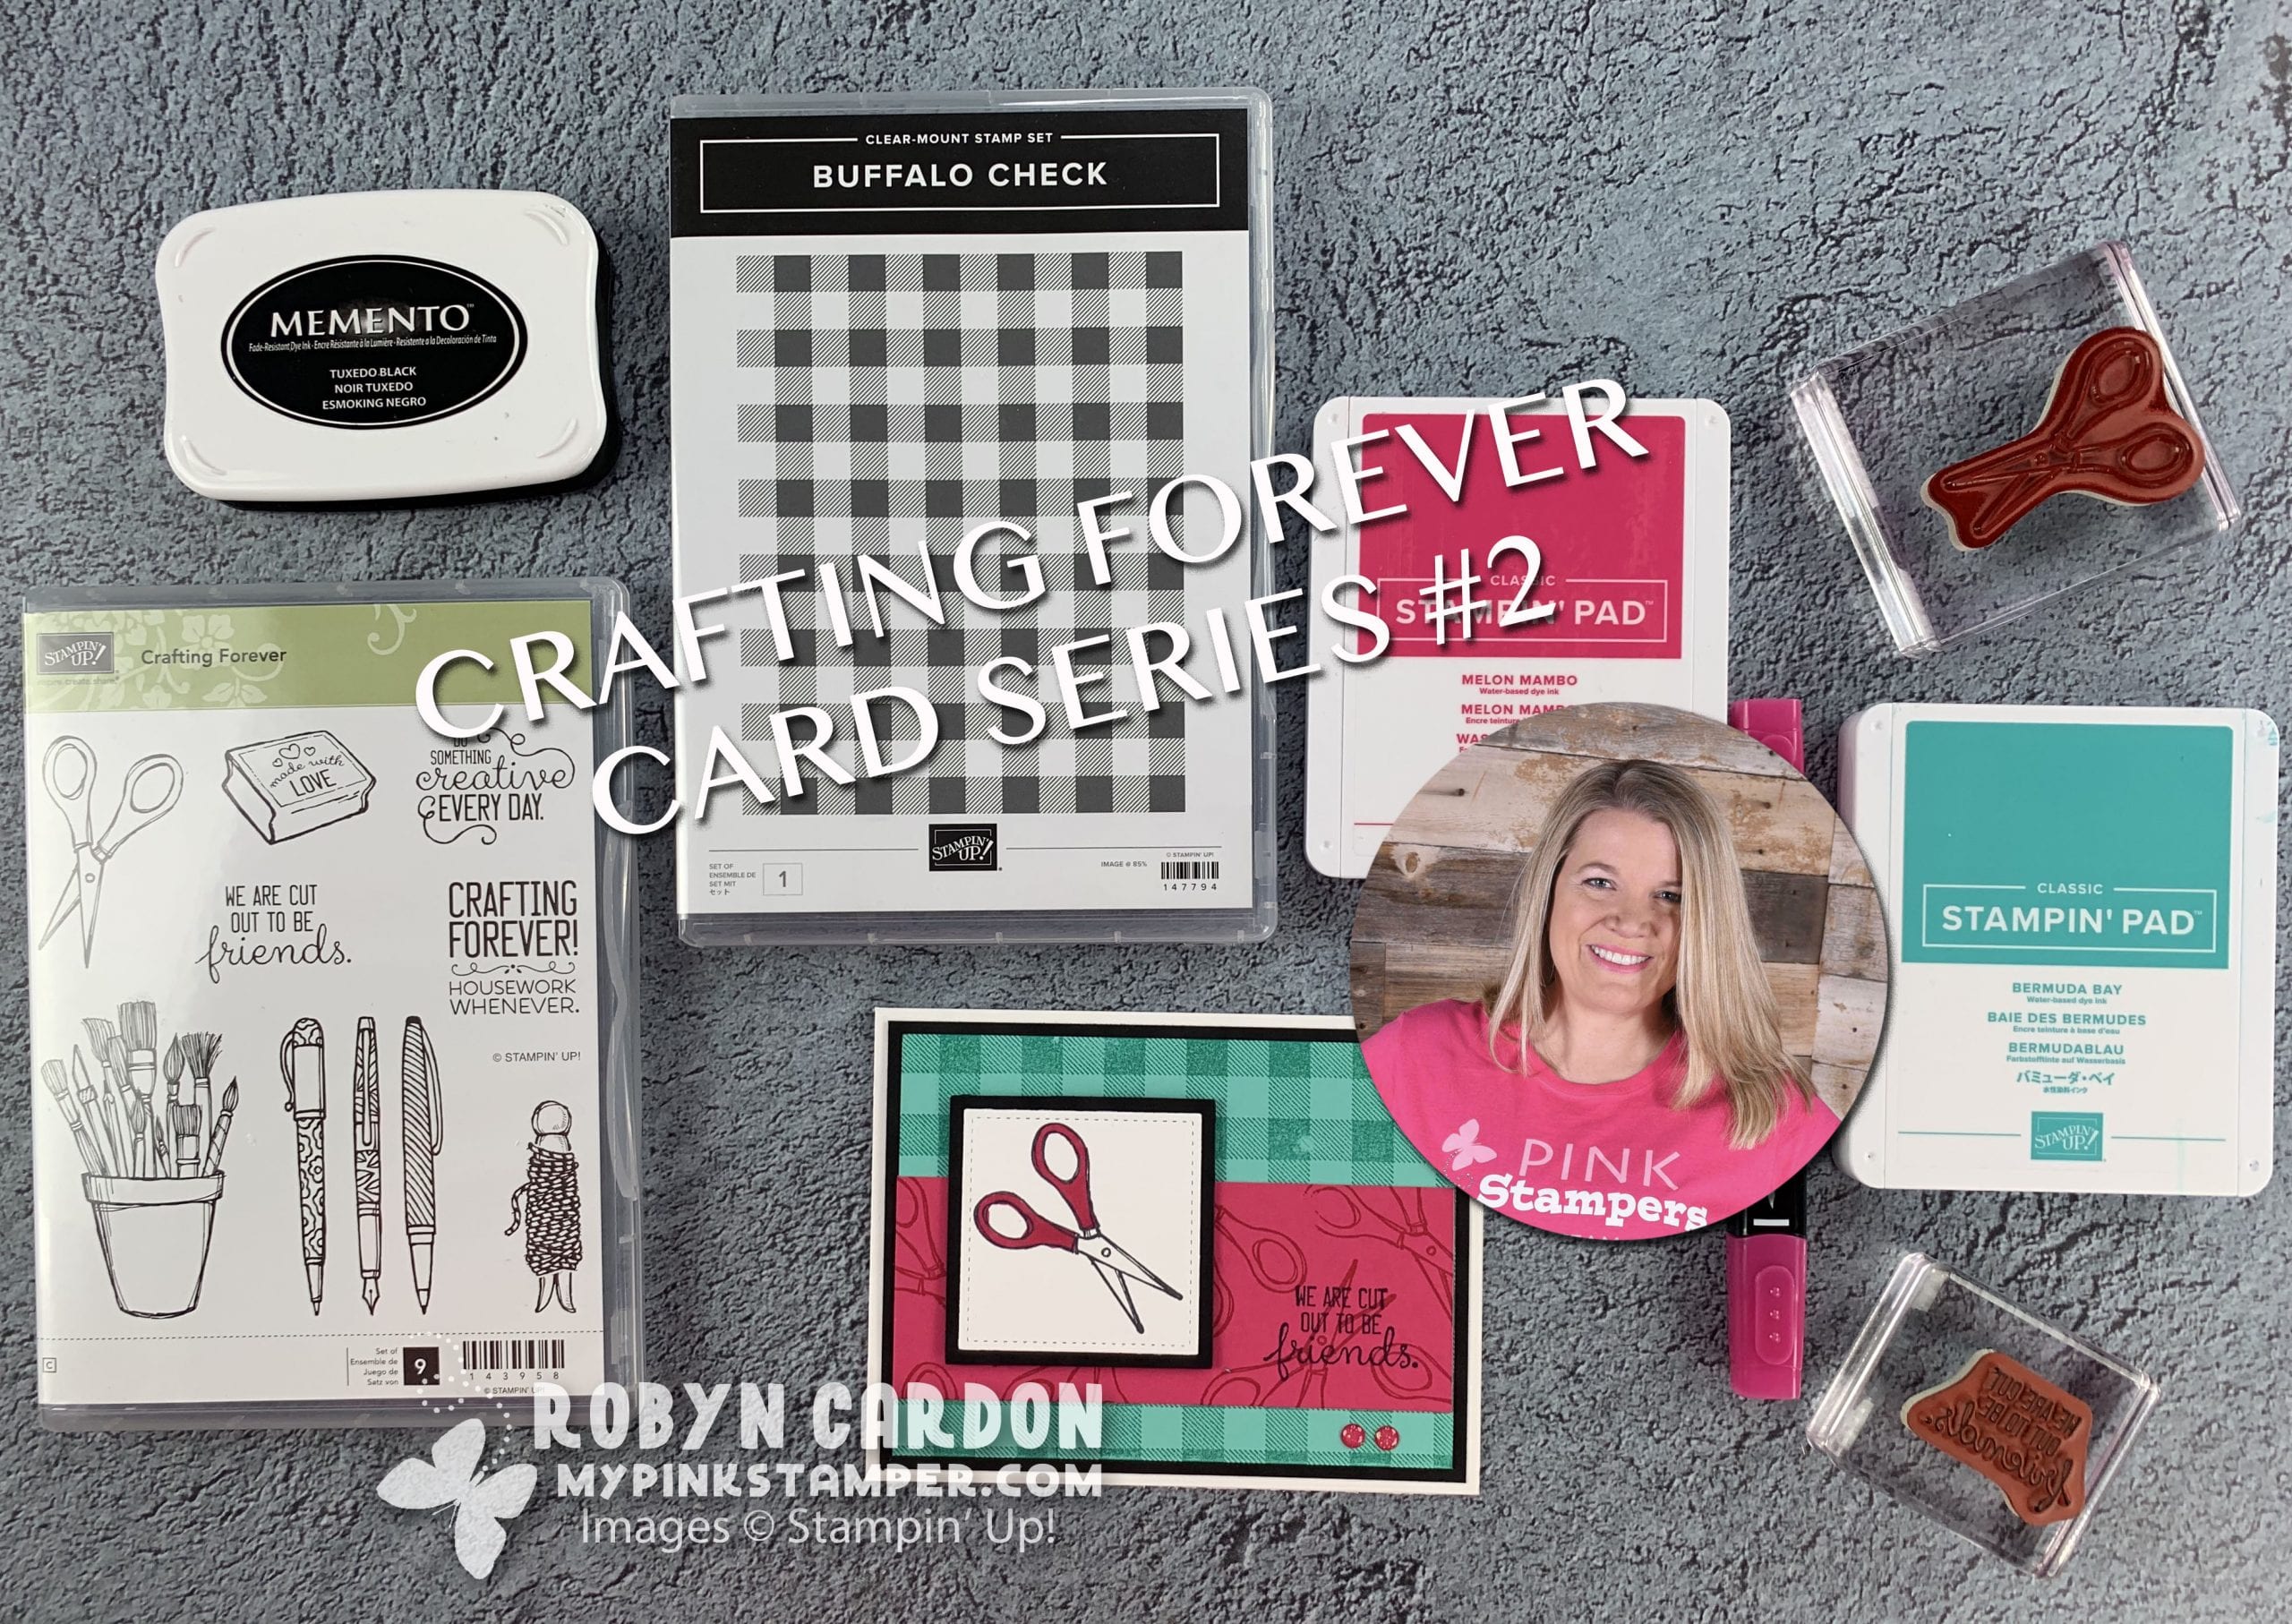 {VIDEO}Episode 741 Stampin’ Up Crafting Forever Card Series #2 & FREE SHIPPING!